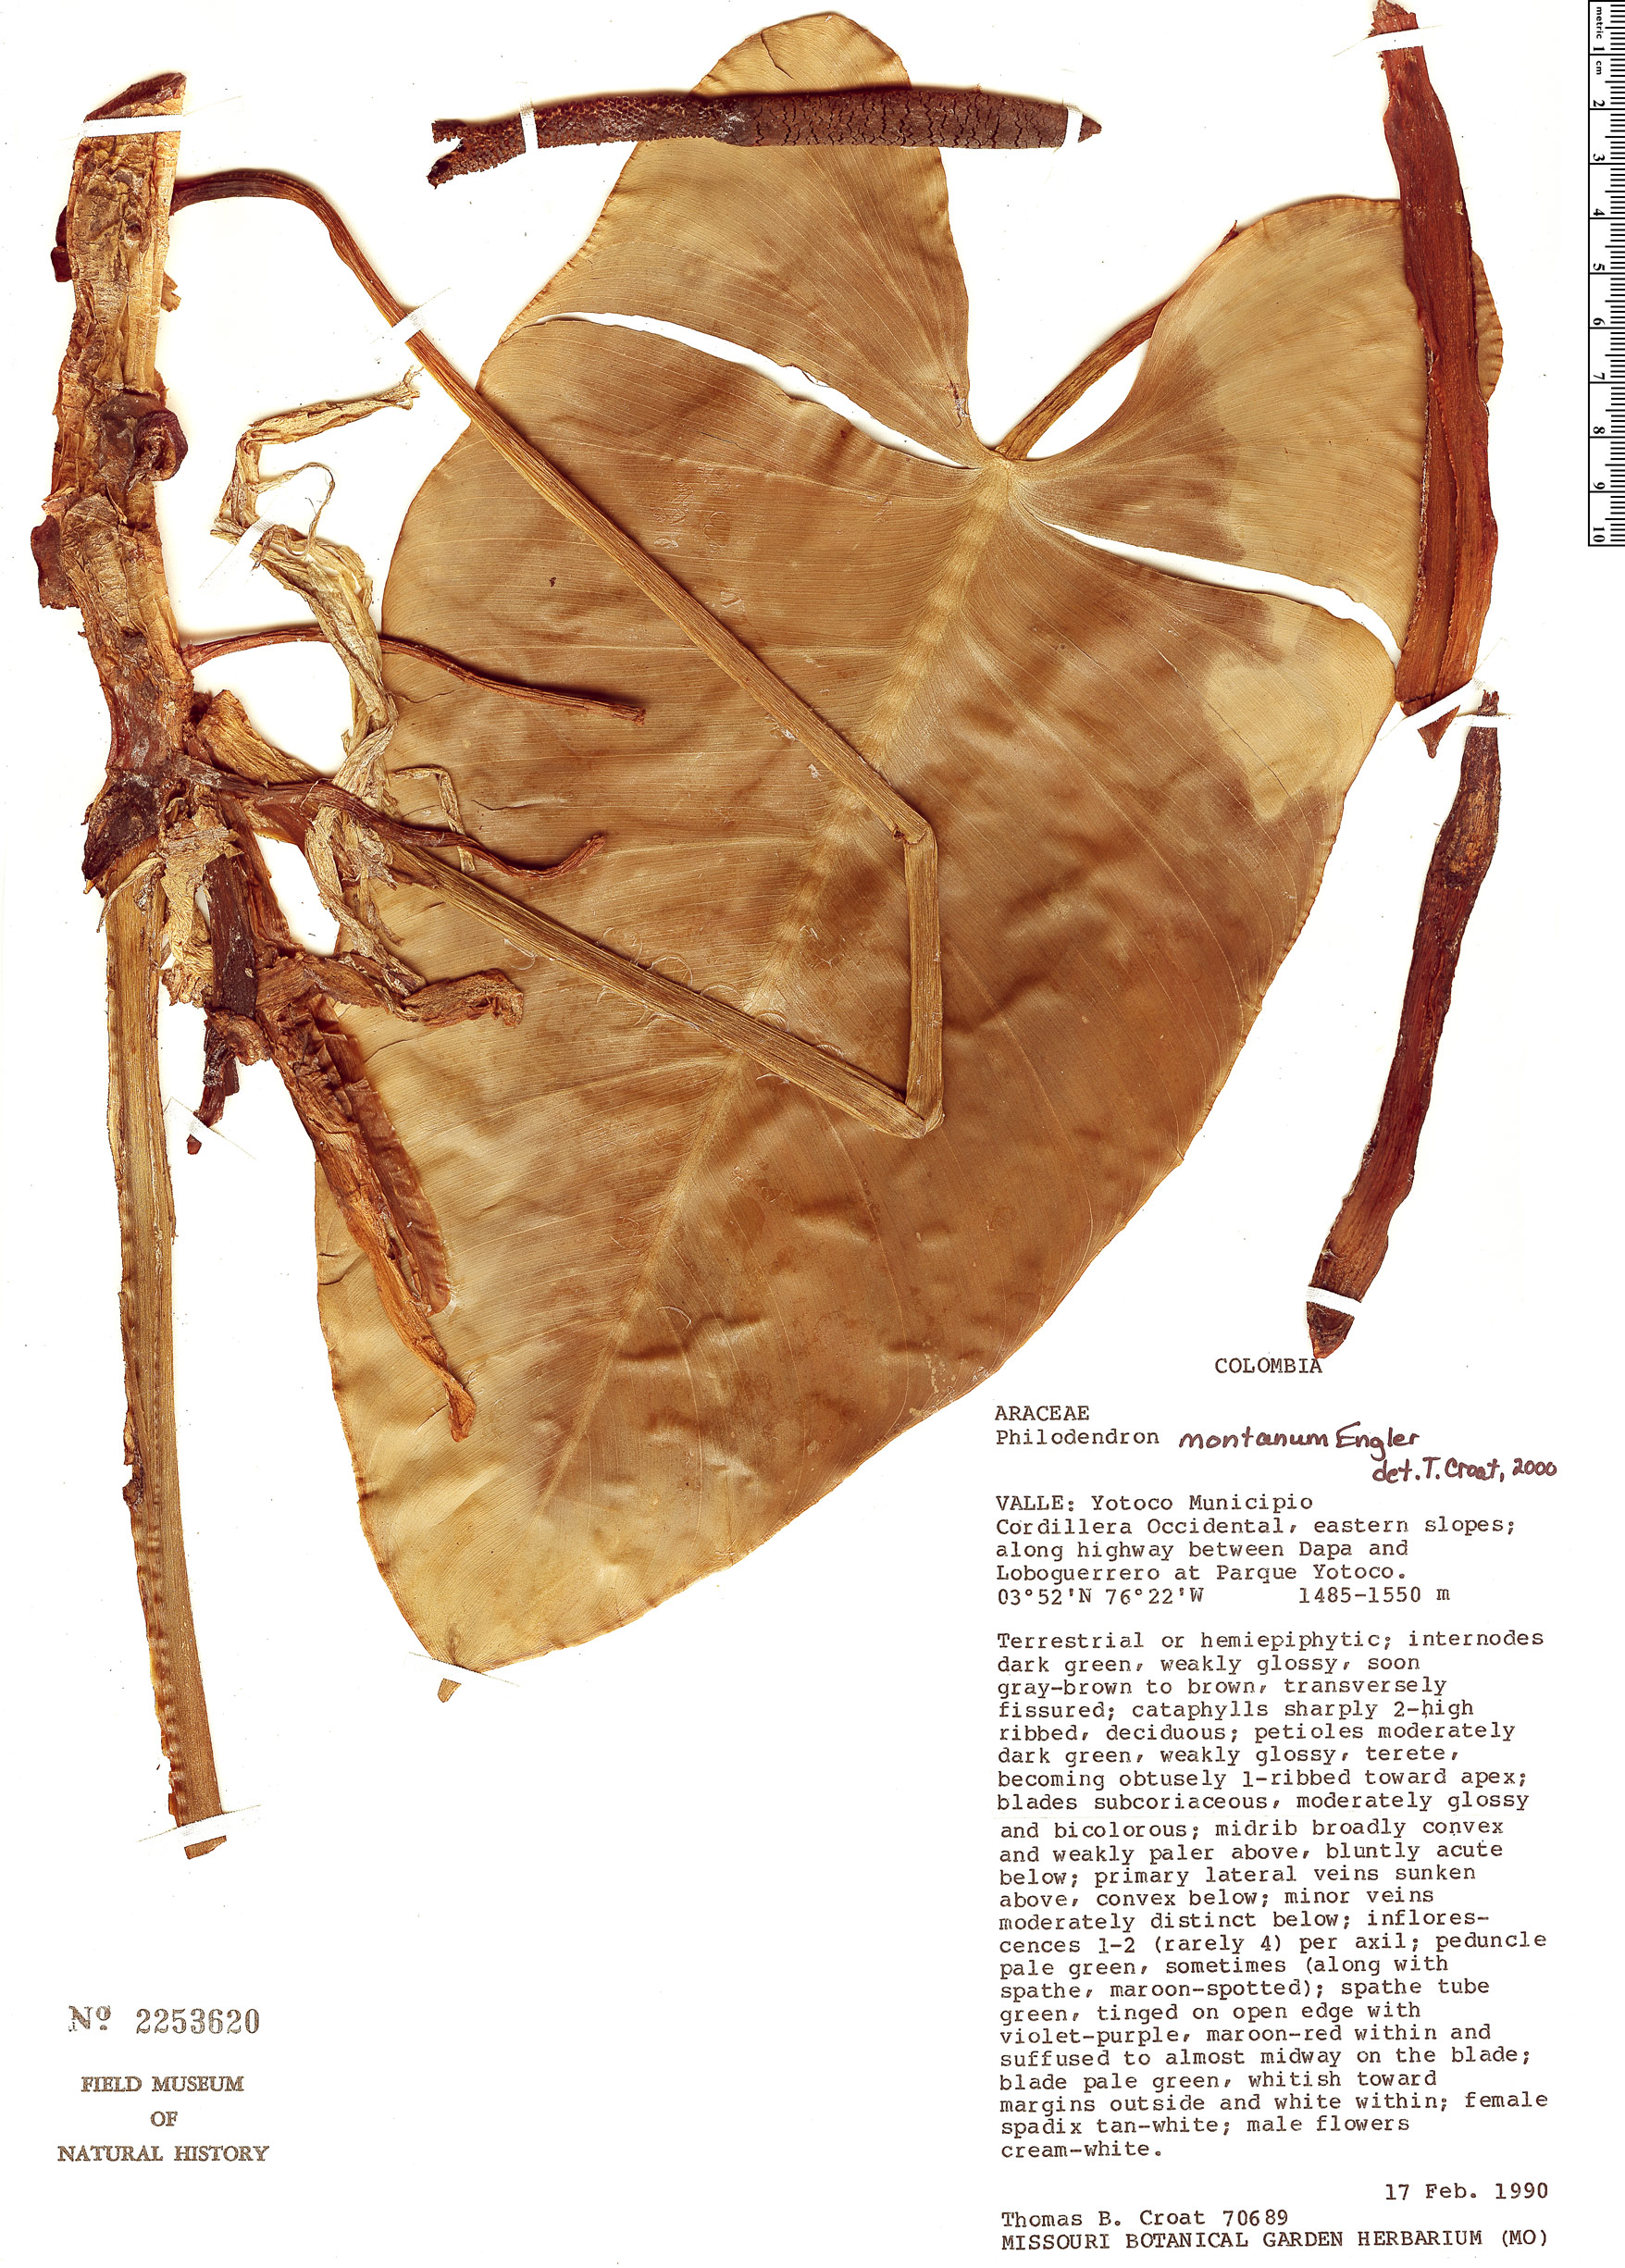 Philodendron montanum image